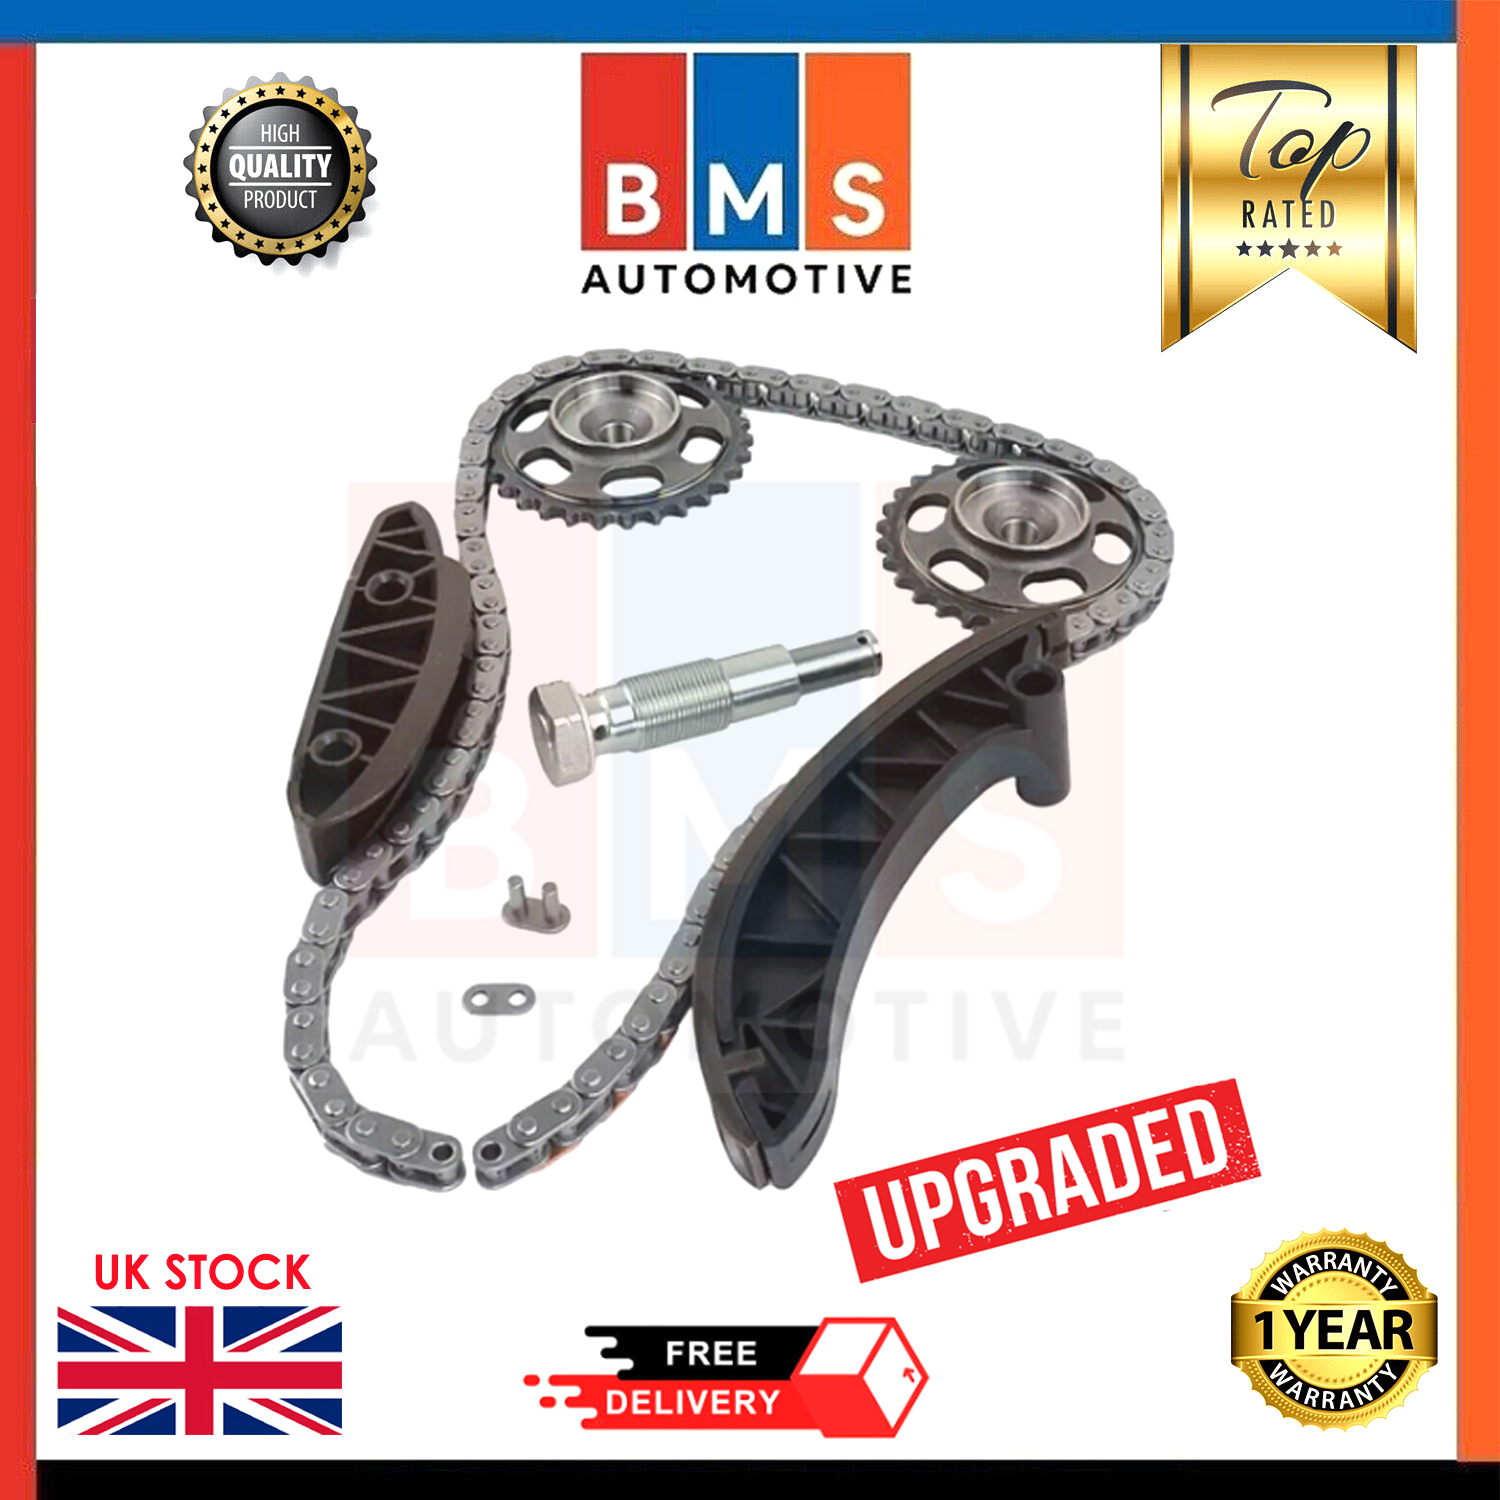 TIMING CHAIN KIT FOR MERCEDES-BENZ 2.1 2.2 CDI OM651 SPRINTER & VITO W639 - NEW!